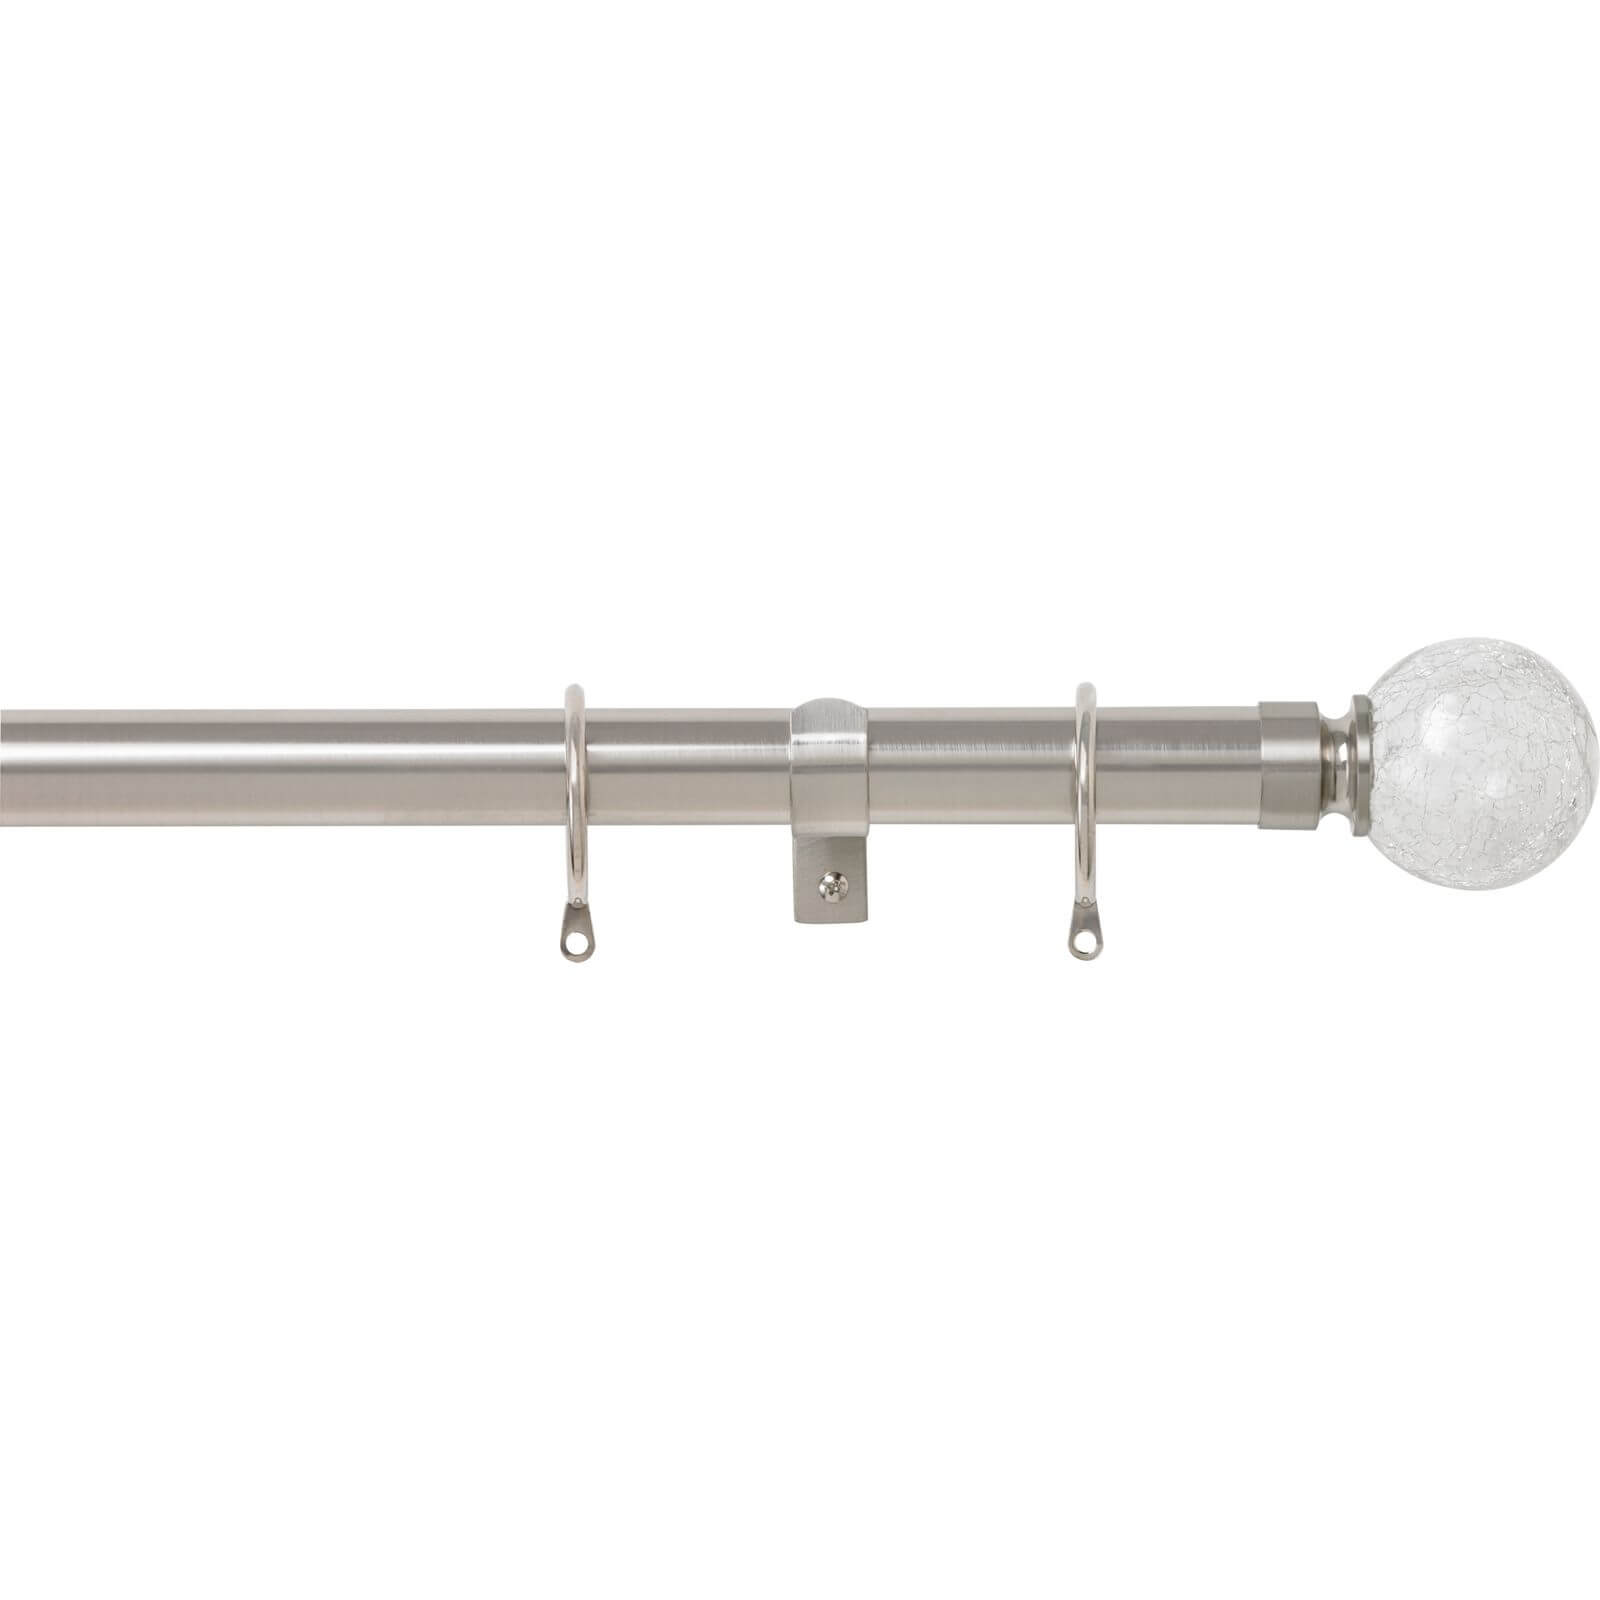 Satin Steel 28mm Fixed Curtain Pole Crackle 3.6m